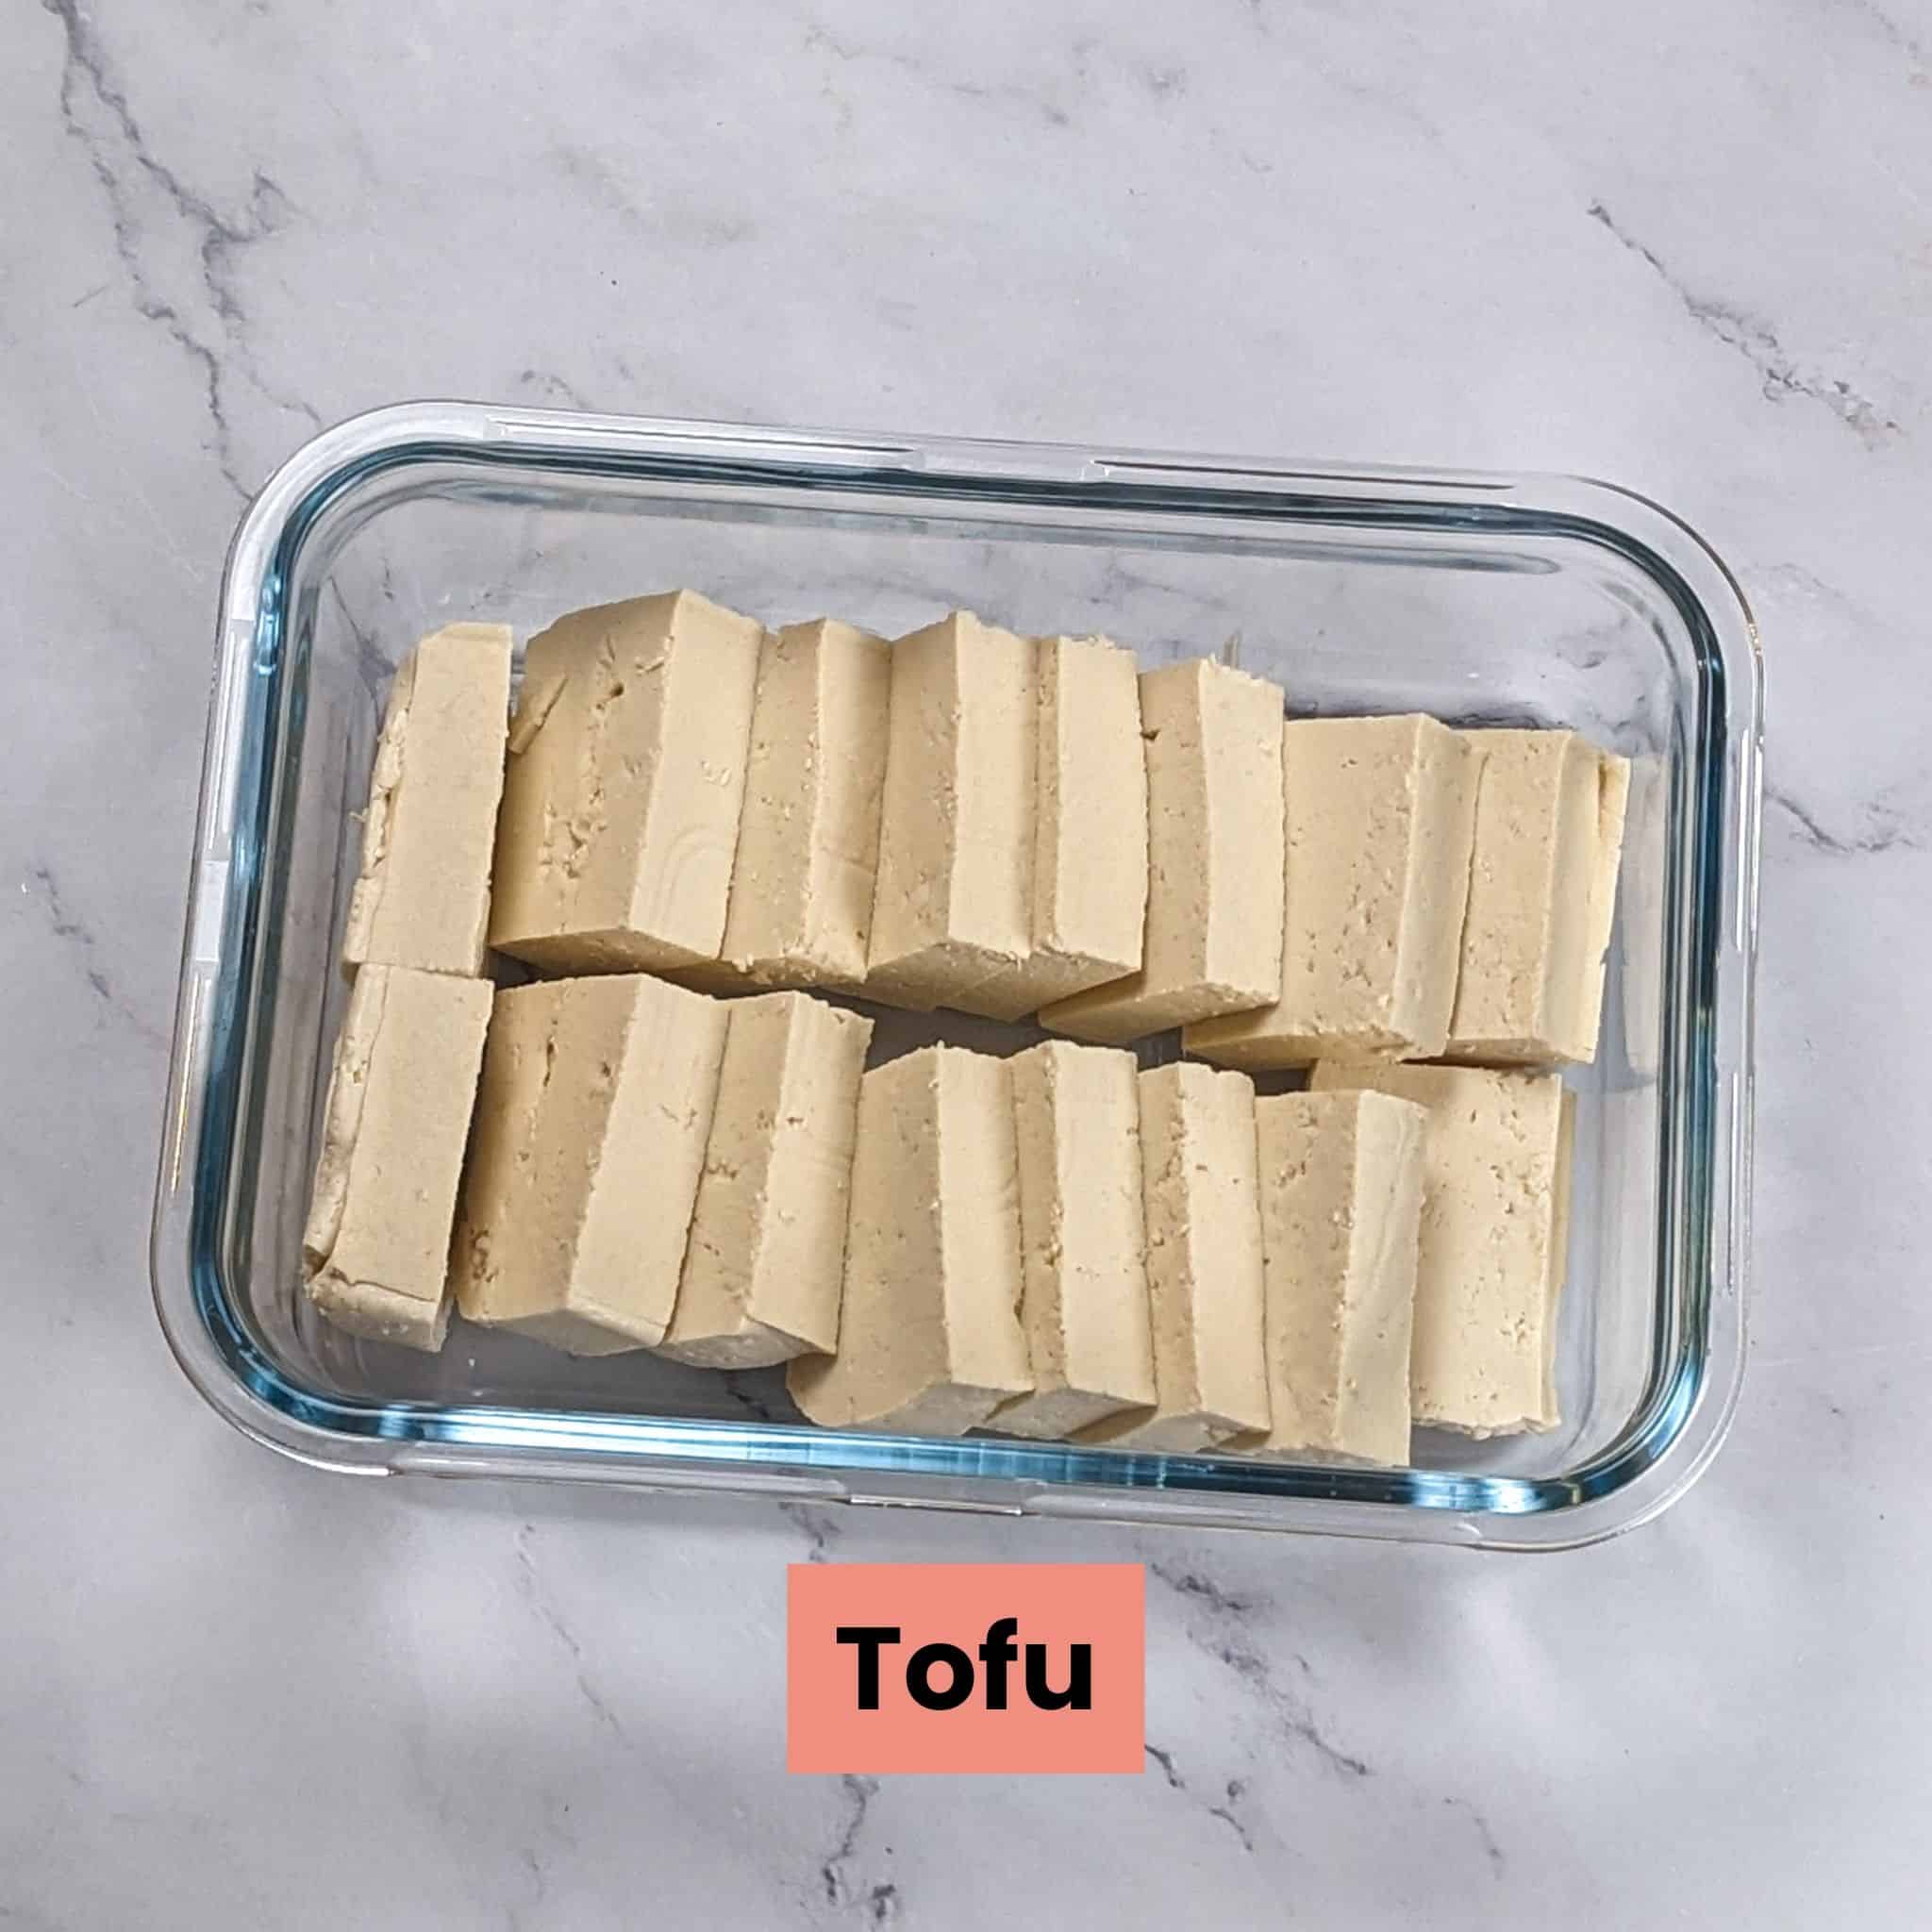 sliced tofu in a glass rectangle container.